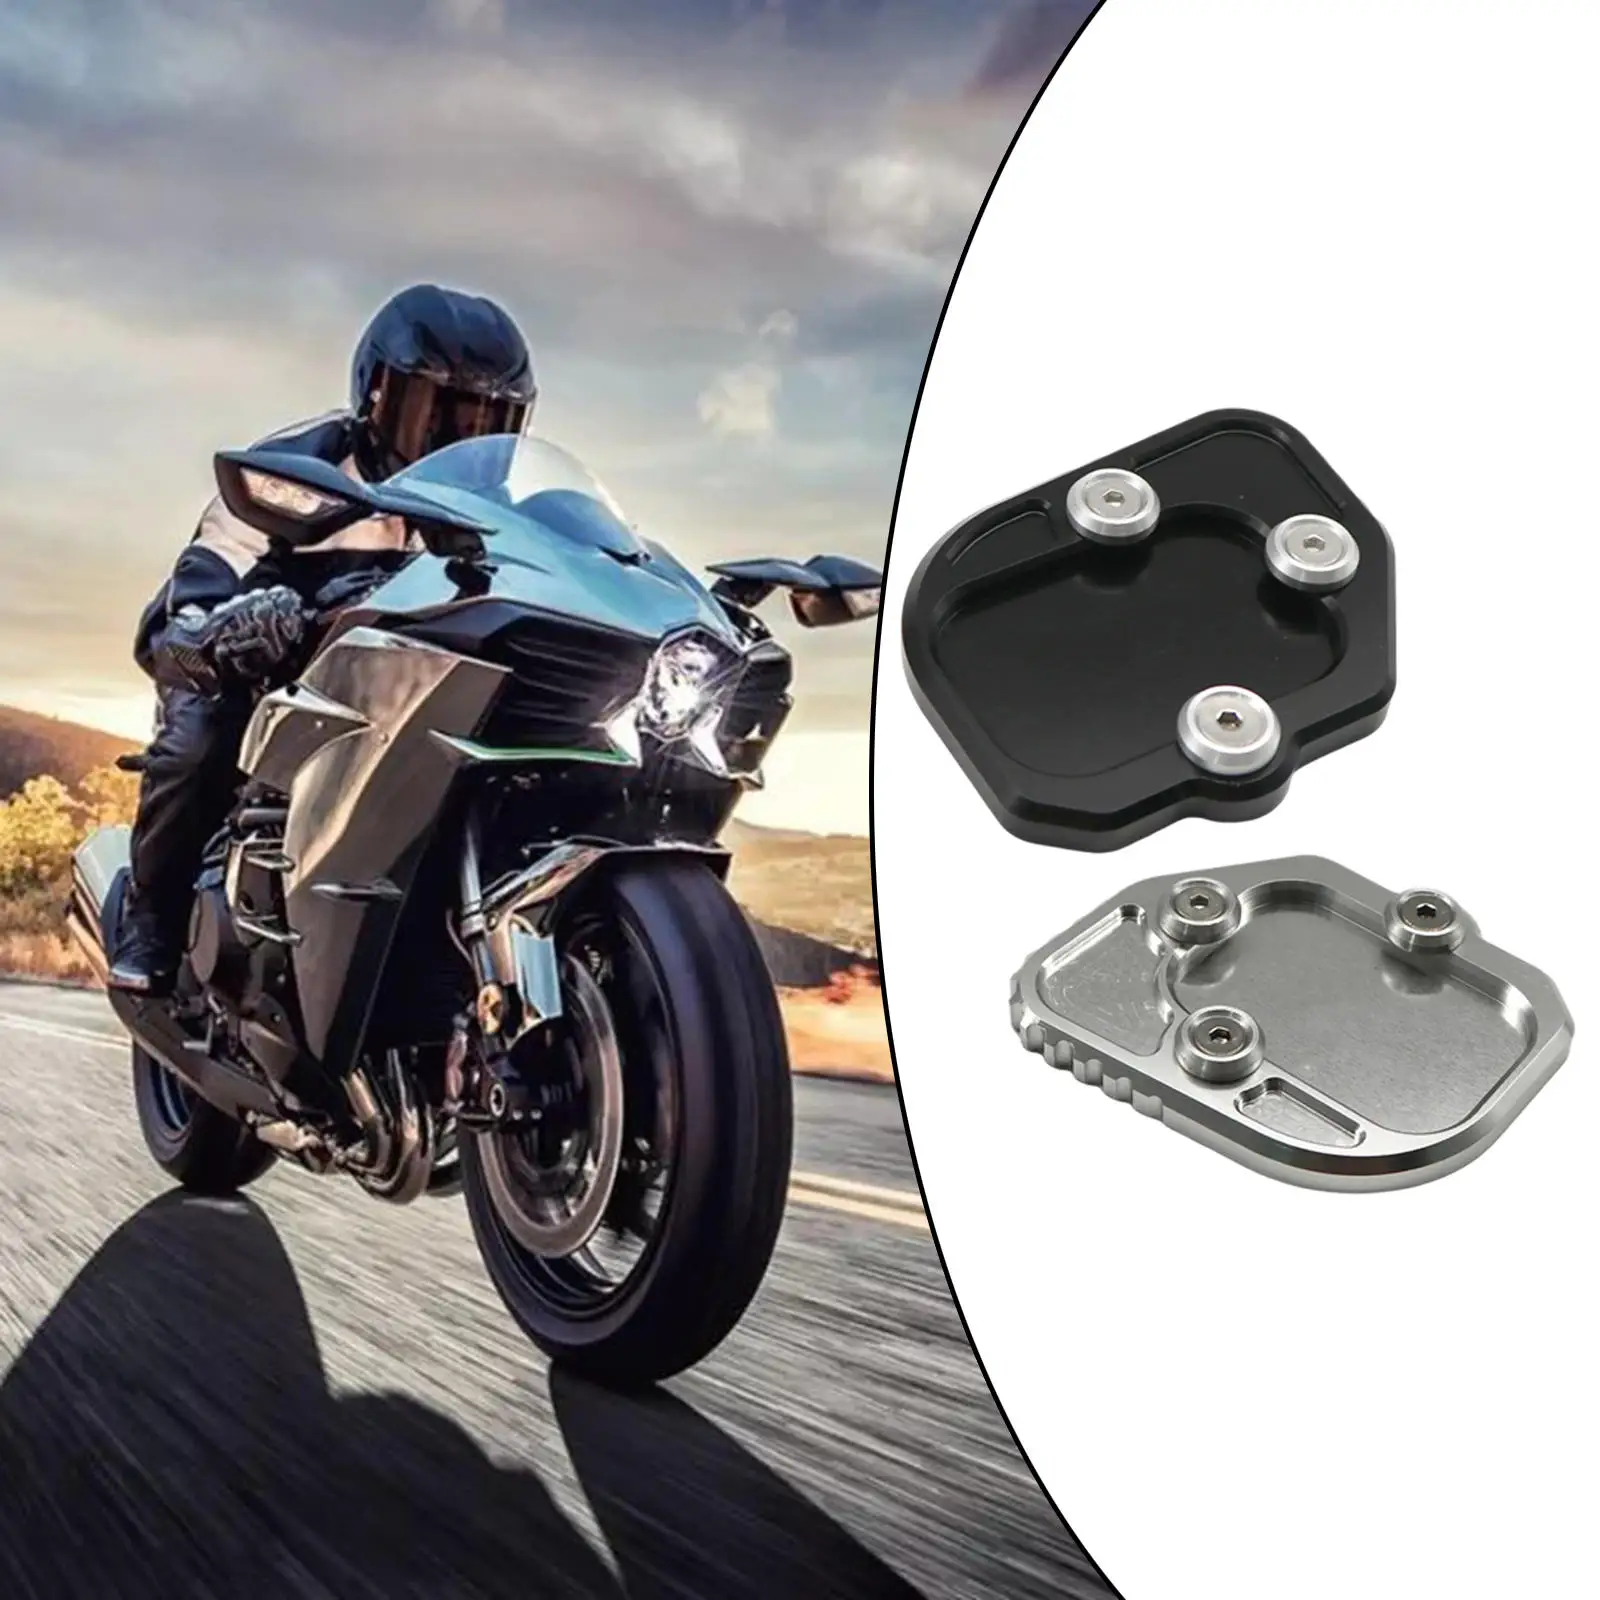 Kickstand Enlarge Pad Motorcycle Replacement Parts Aluminum Alloy Support Plate Fits for BMW C400 x GT C 400x C400GT 2019-2021